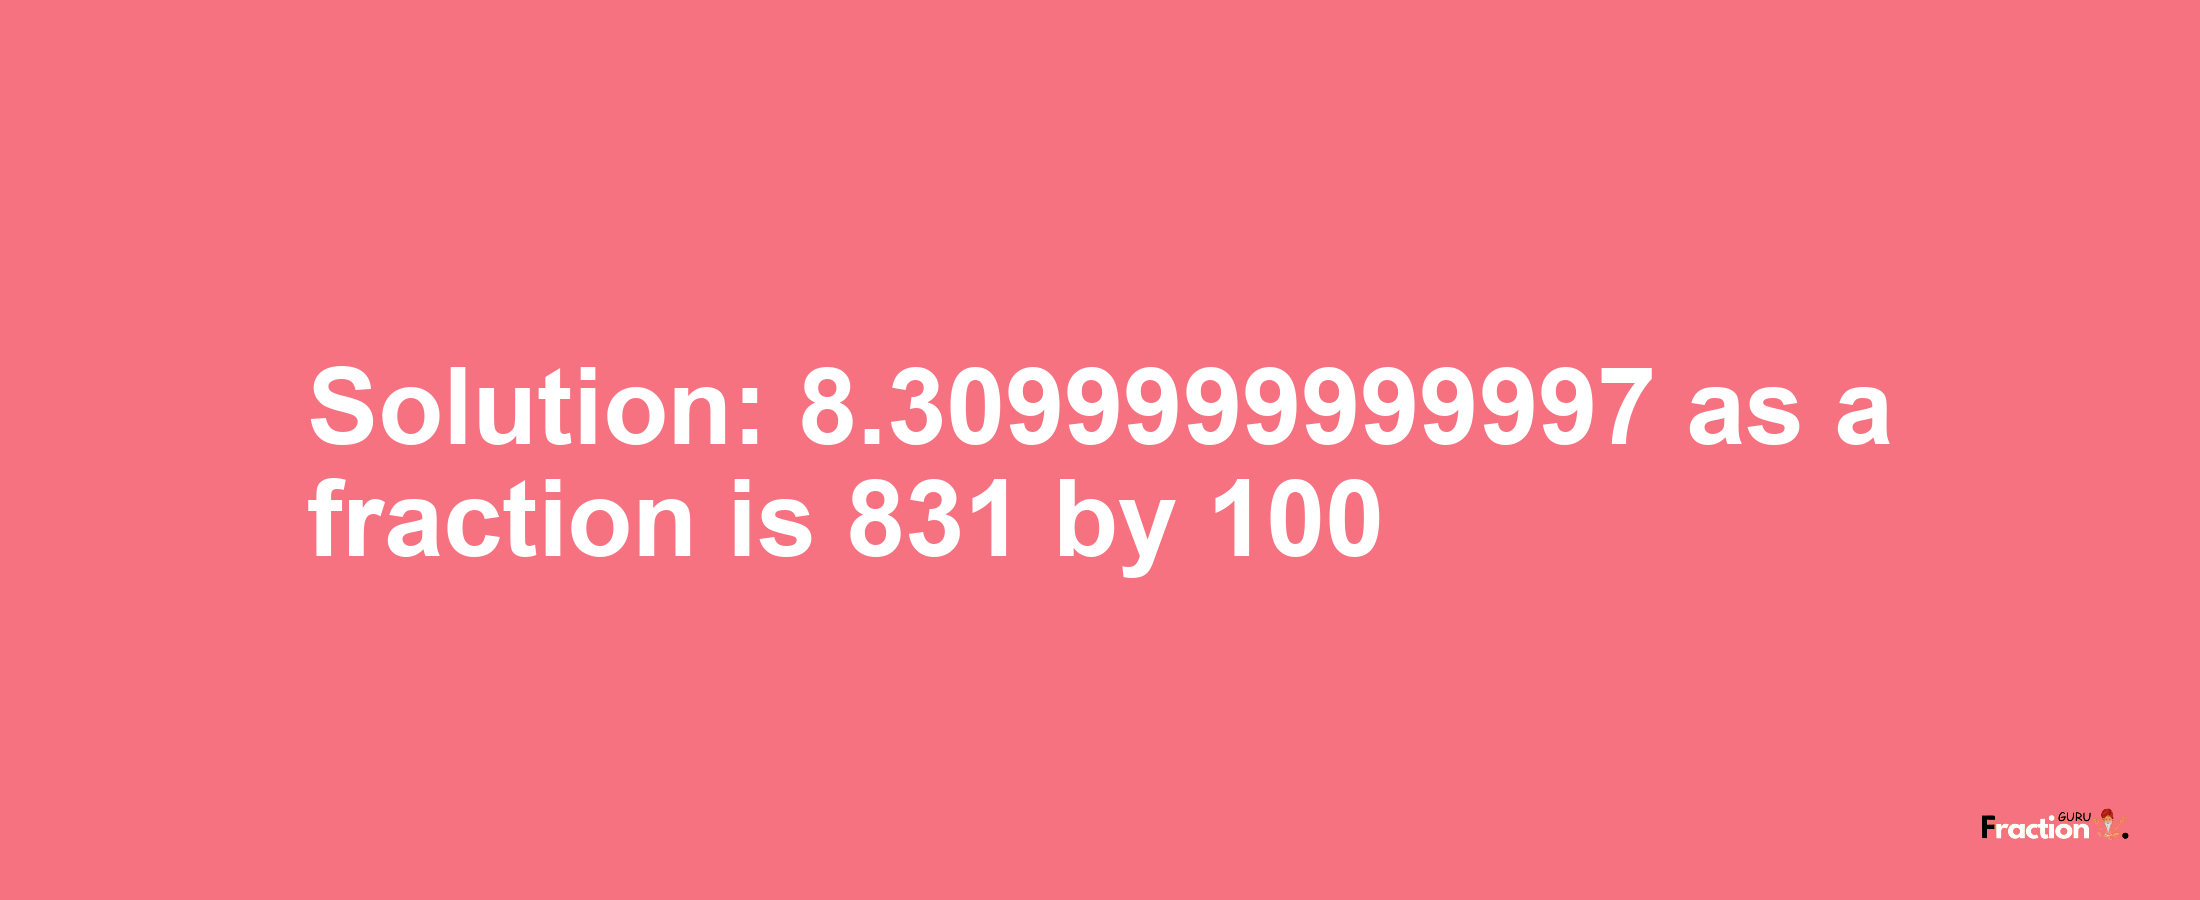 Solution:8.3099999999997 as a fraction is 831/100